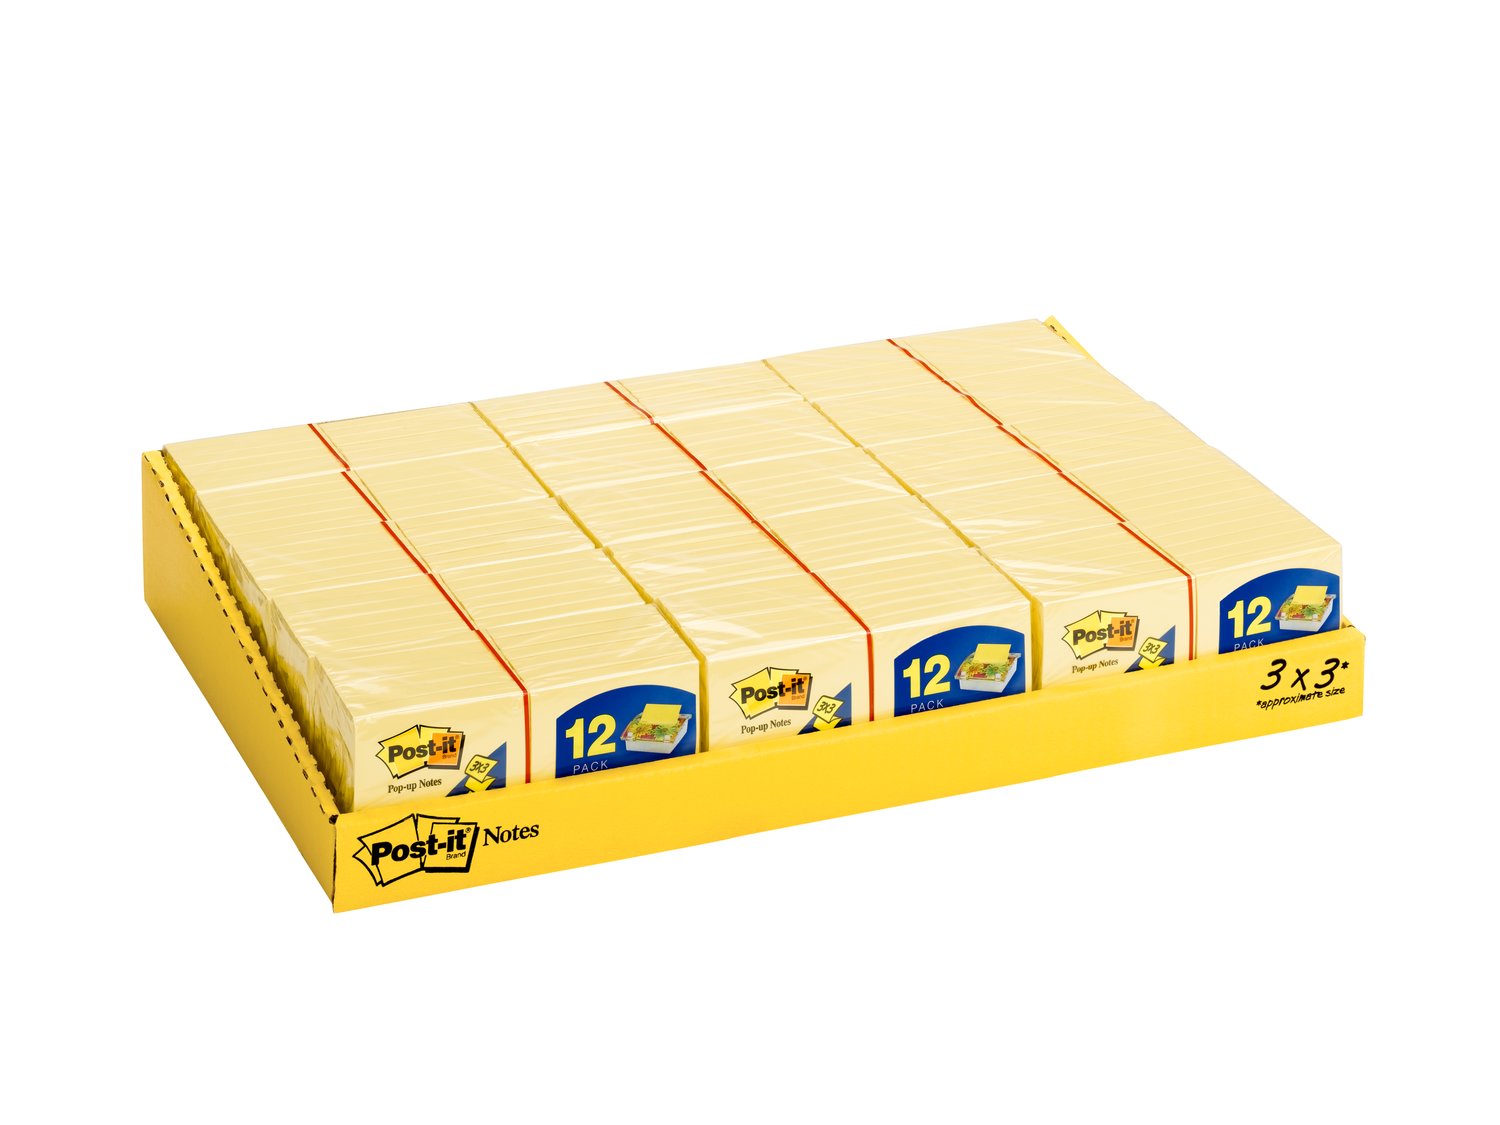 7010331902 - Post-it Notes R330-YWT Canary Yellow